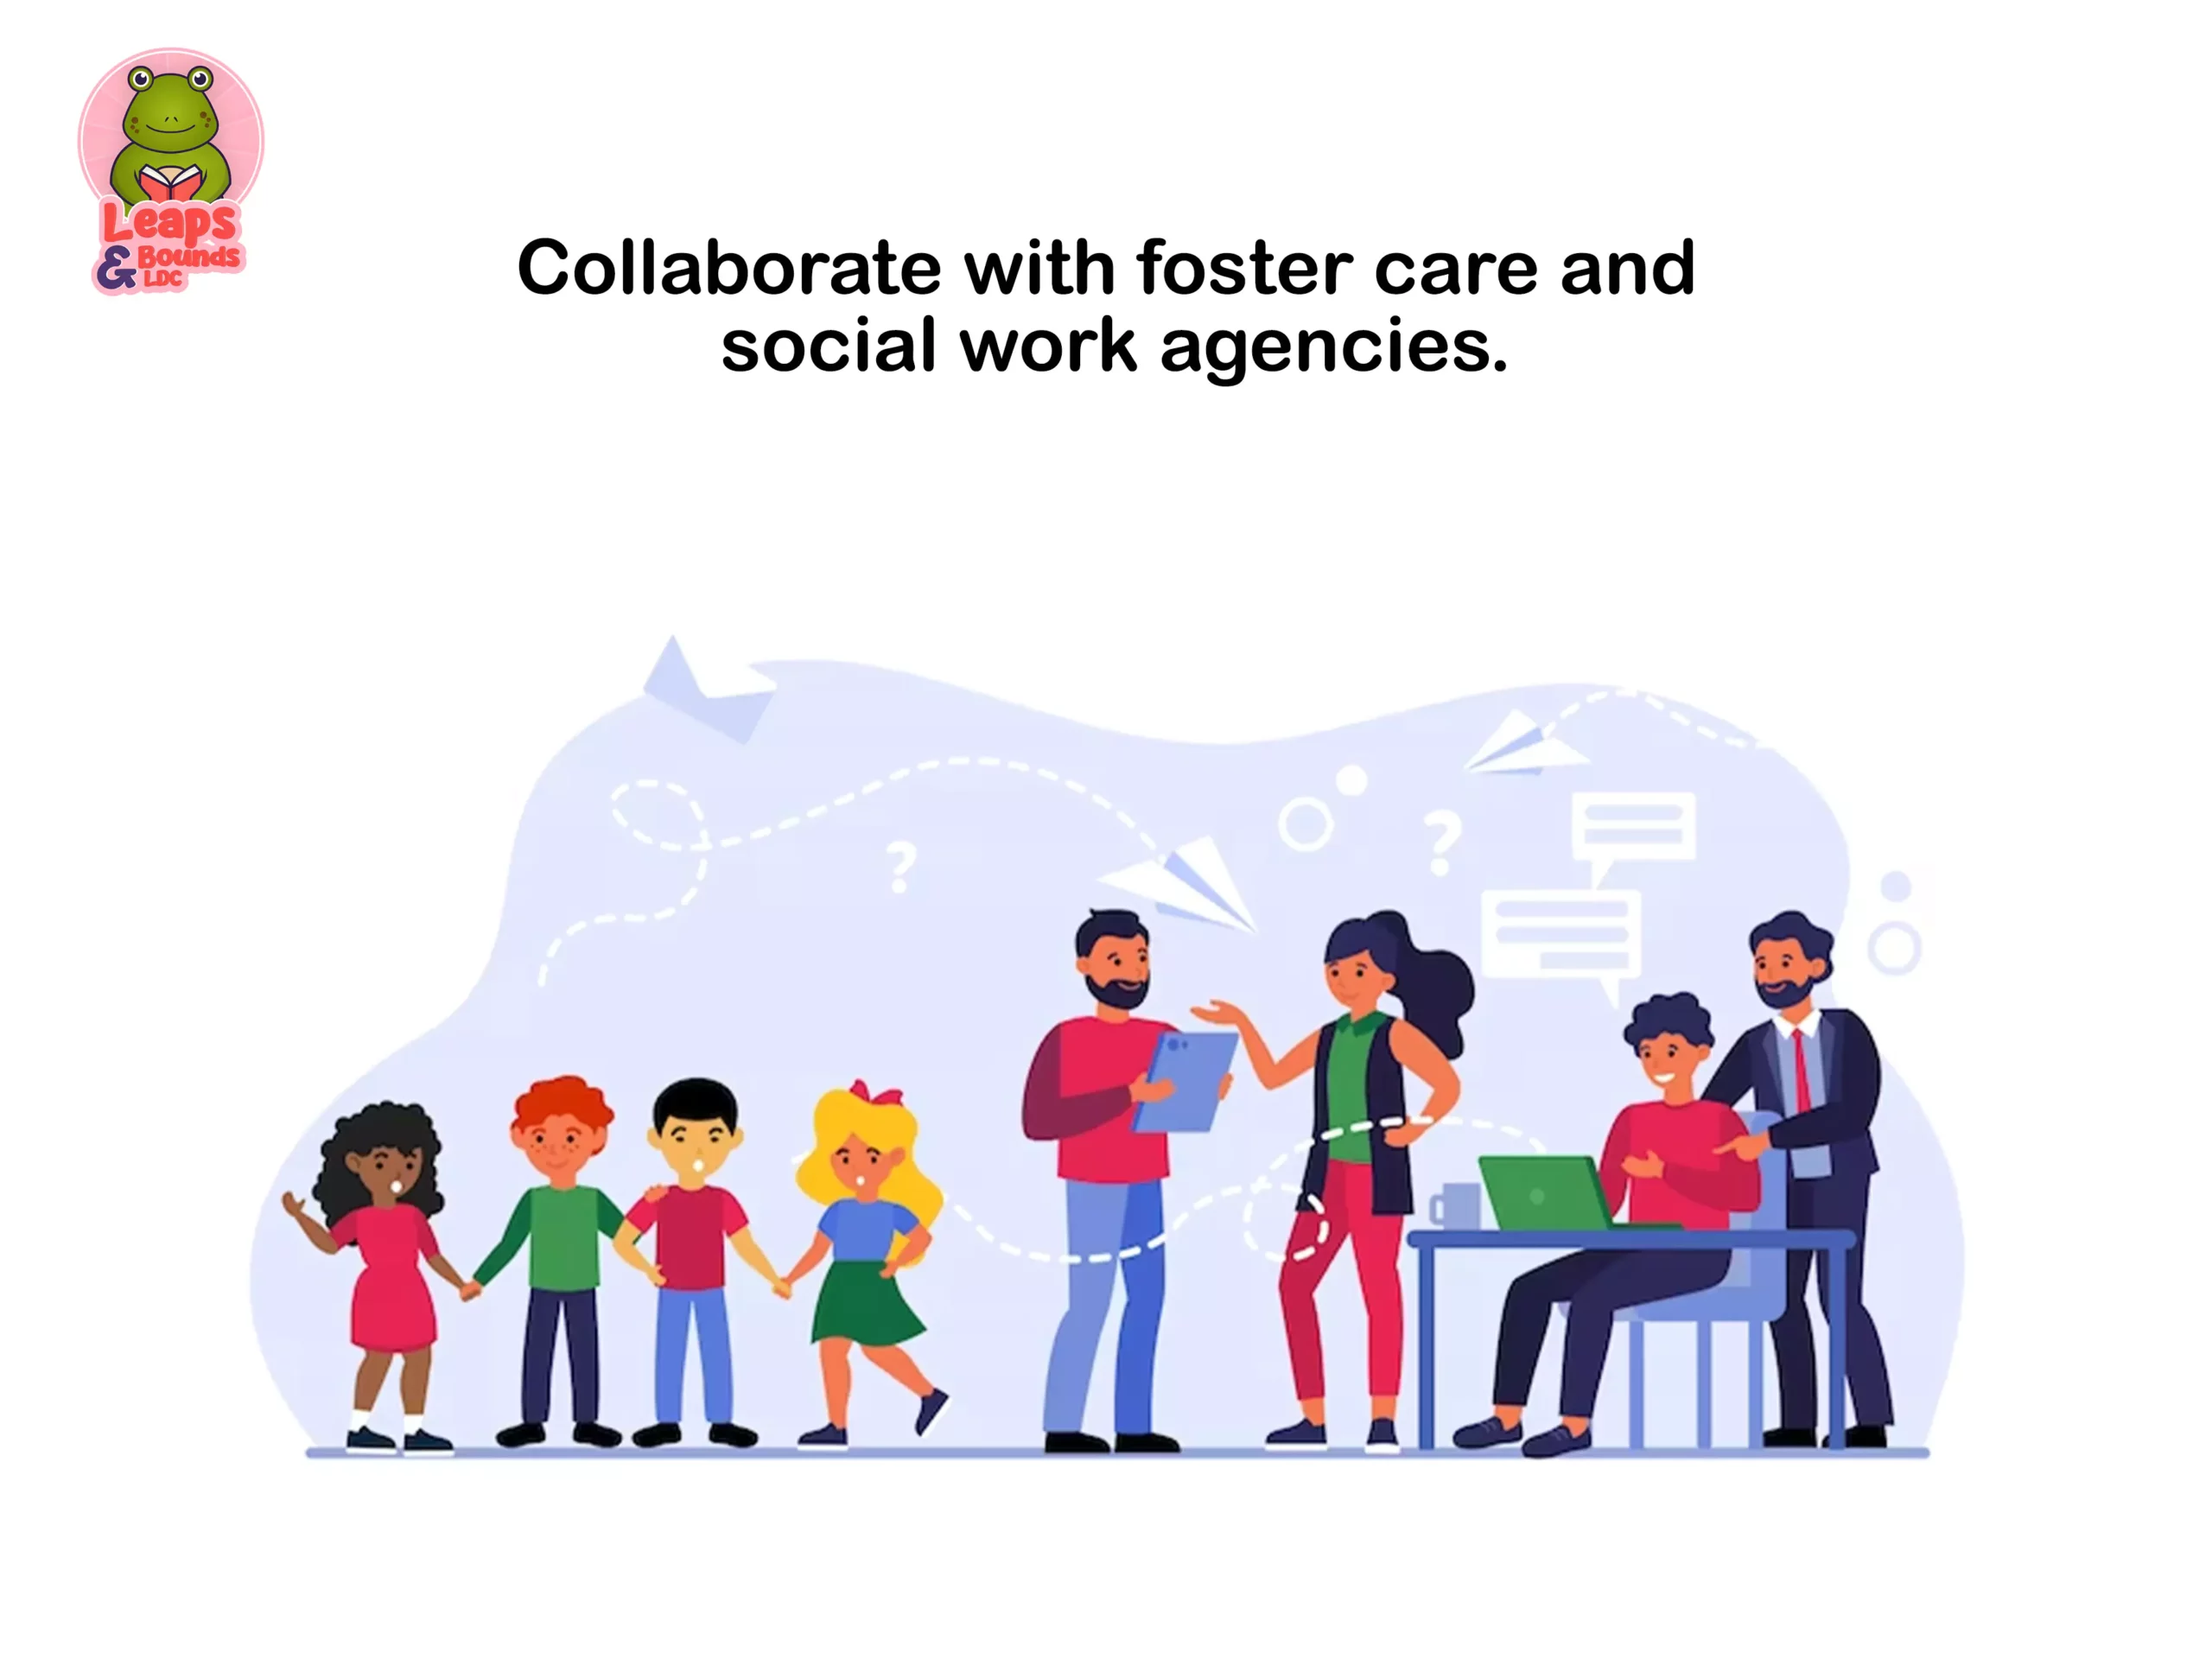 Collaborate With Foster Care and Social Work Agencies